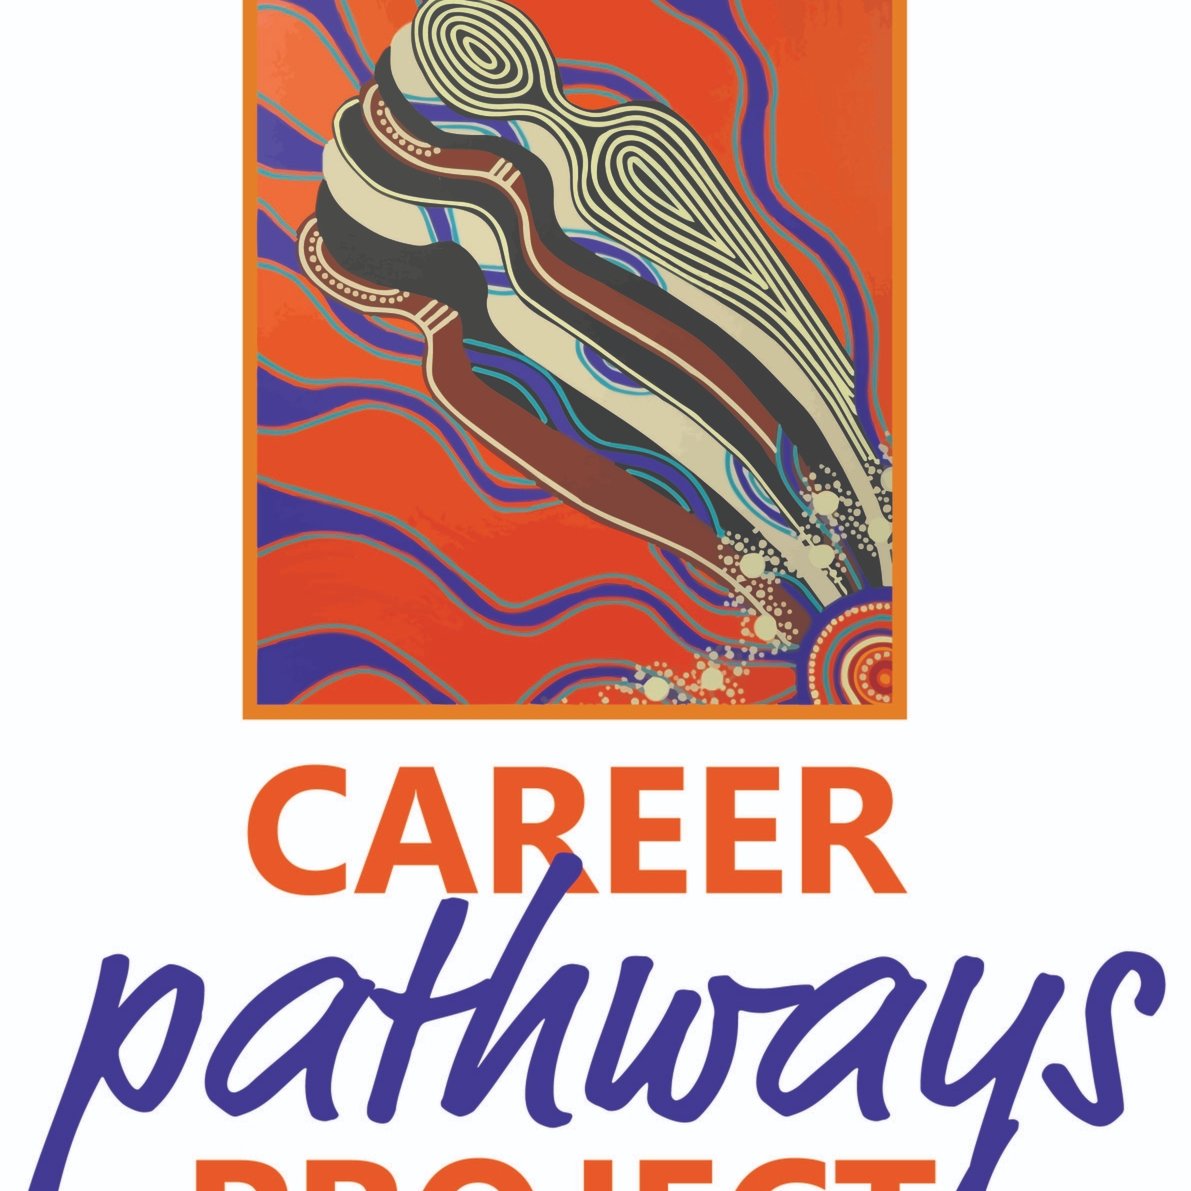 The Career Pathways Project is being led by Aboriginal Community Controlled Health Organisations. Examining retention and career development in health.